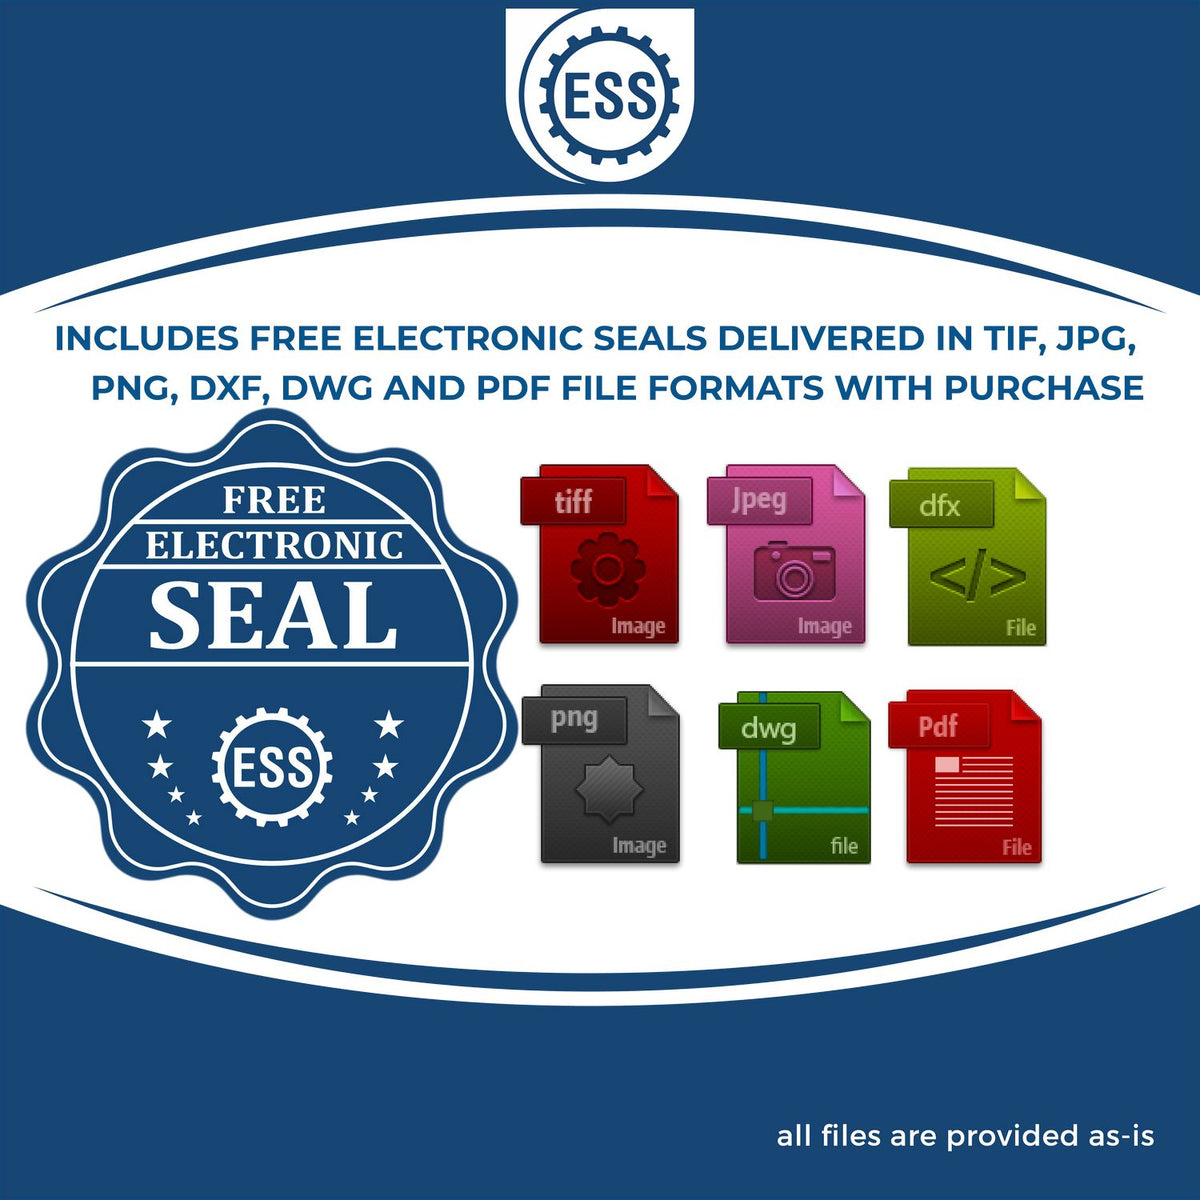 An infographic for the free electronic seal for the Extended Long Reach Maine Surveyor Embosser illustrating the different file type icons such as DXF, DWG, TIF, JPG and PNG.